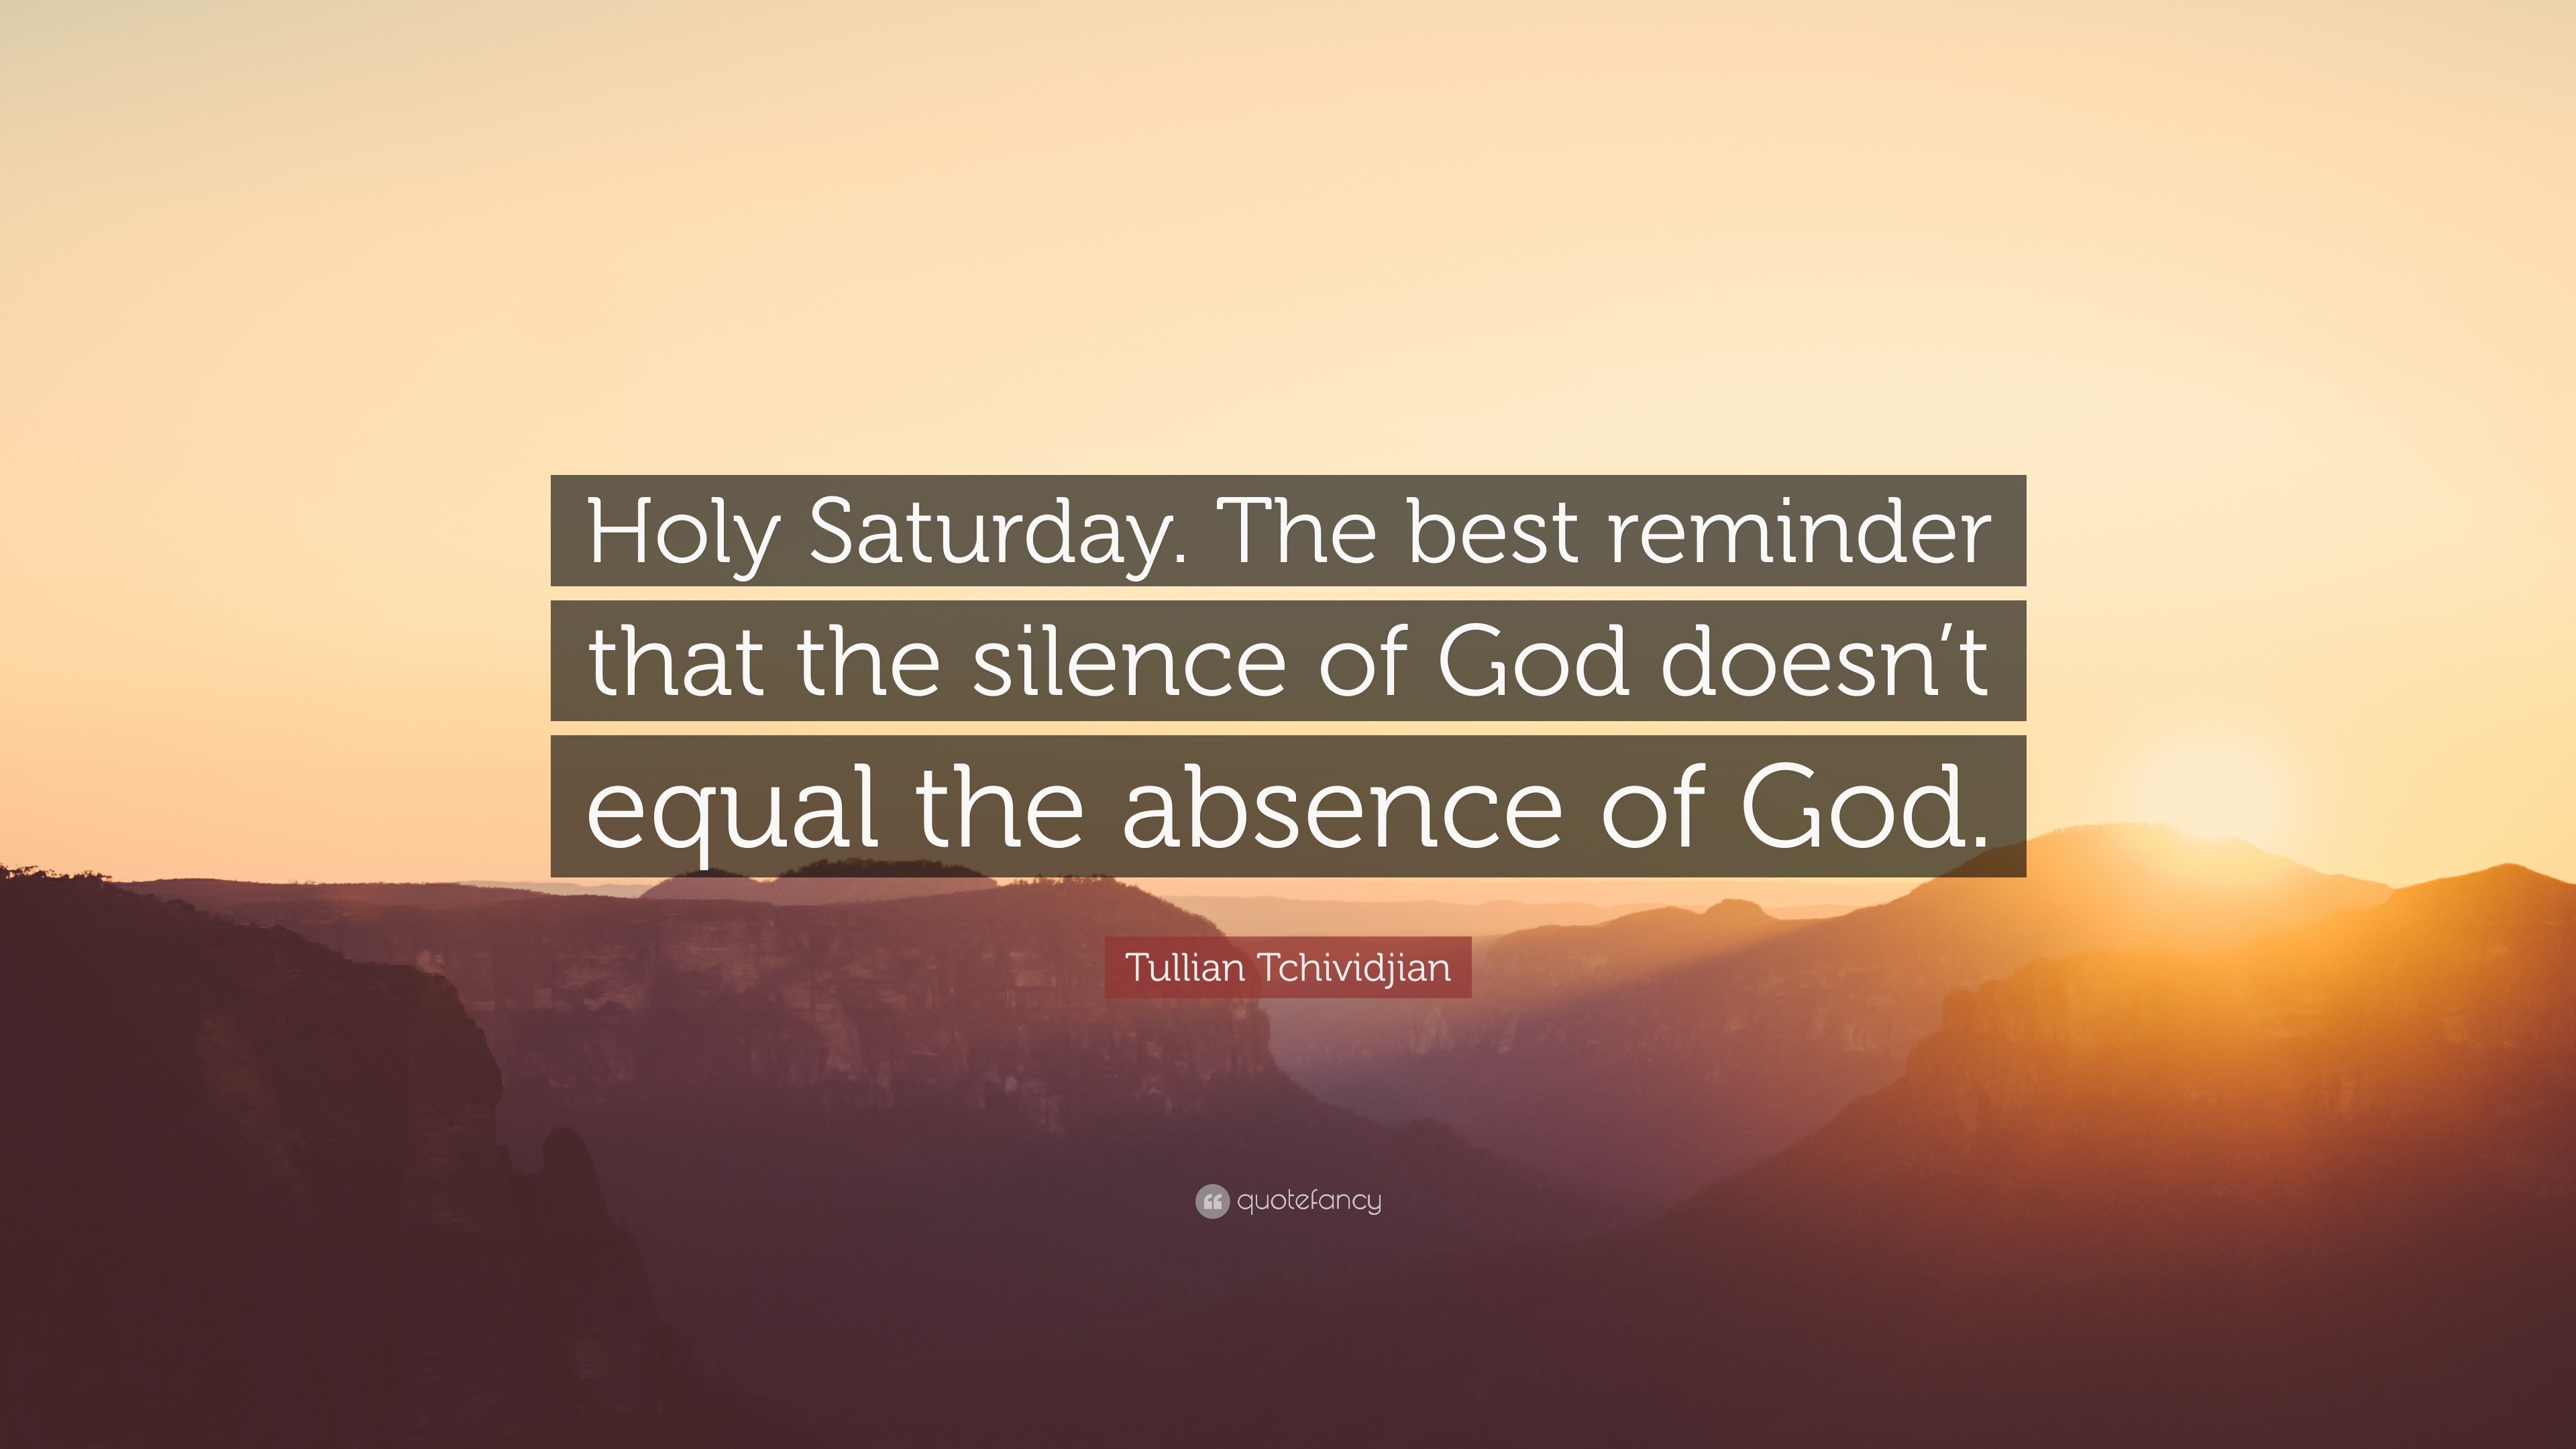 KPG Rosary Family SAINT QUOTE OF THE DAY  Holy Saturday  April 11, 2020